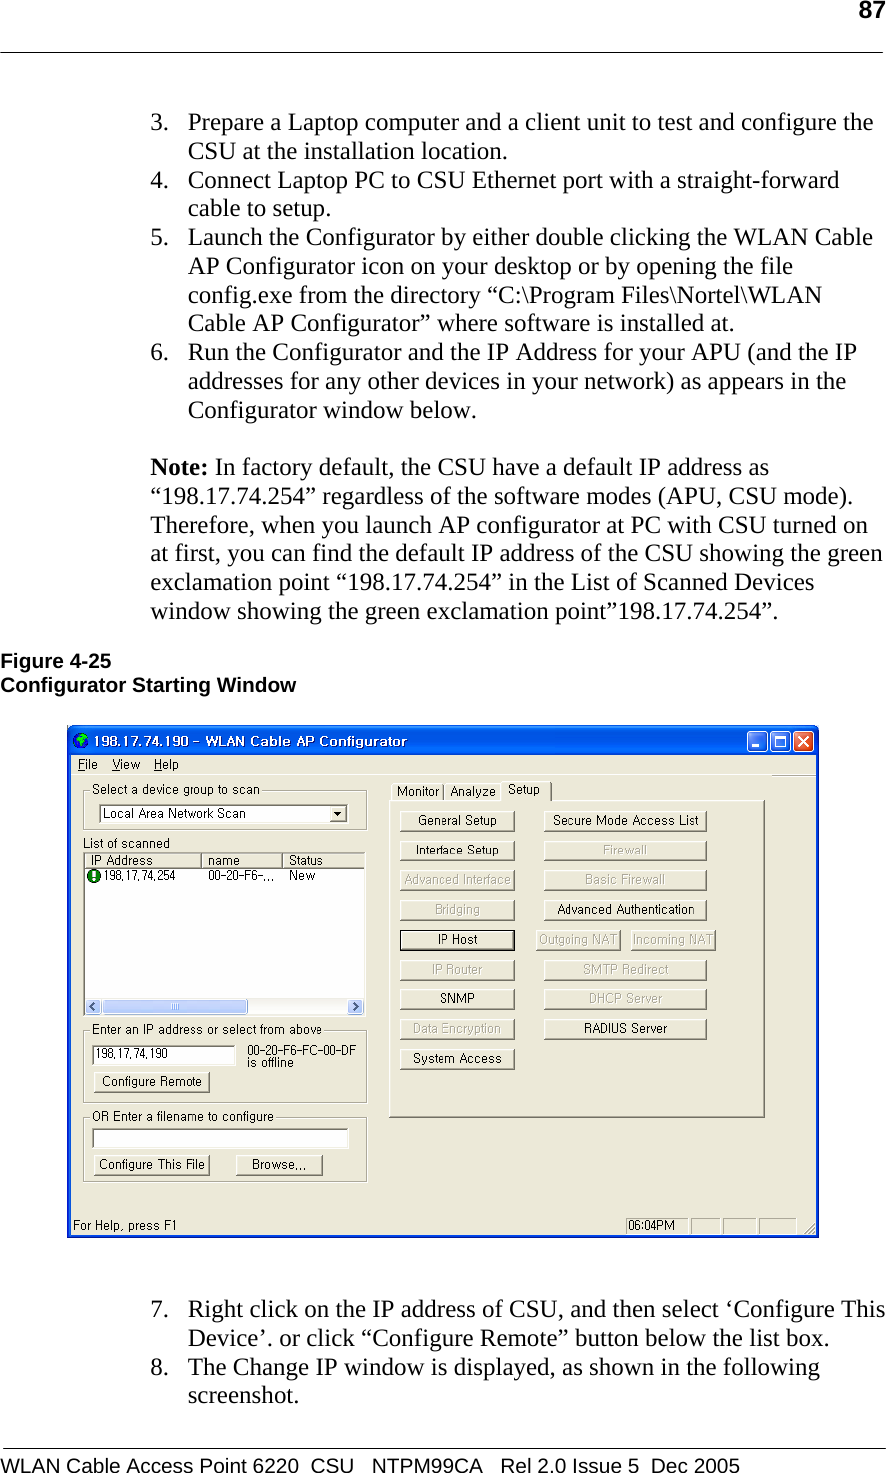   87  WLAN Cable Access Point 6220  CSU   NTPM99CA   Rel 2.0 Issue 5  Dec 2005 3. Prepare a Laptop computer and a client unit to test and configure the CSU at the installation location.  4. Connect Laptop PC to CSU Ethernet port with a straight-forward cable to setup. 5. Launch the Configurator by either double clicking the WLAN Cable AP Configurator icon on your desktop or by opening the file config.exe from the directory “C:\Program Files\Nortel\WLAN Cable AP Configurator” where software is installed at.  6. Run the Configurator and the IP Address for your APU (and the IP addresses for any other devices in your network) as appears in the Configurator window below.  Note: In factory default, the CSU have a default IP address as “198.17.74.254” regardless of the software modes (APU, CSU mode).   Therefore, when you launch AP configurator at PC with CSU turned on at first, you can find the default IP address of the CSU showing the green exclamation point “198.17.74.254” in the List of Scanned Devices window showing the green exclamation point”198.17.74.254”.  Figure 4-25 Configurator Starting Window      7. Right click on the IP address of CSU, and then select ‘Configure This Device’. or click “Configure Remote” button below the list box.  8. The Change IP window is displayed, as shown in the following screenshot.  